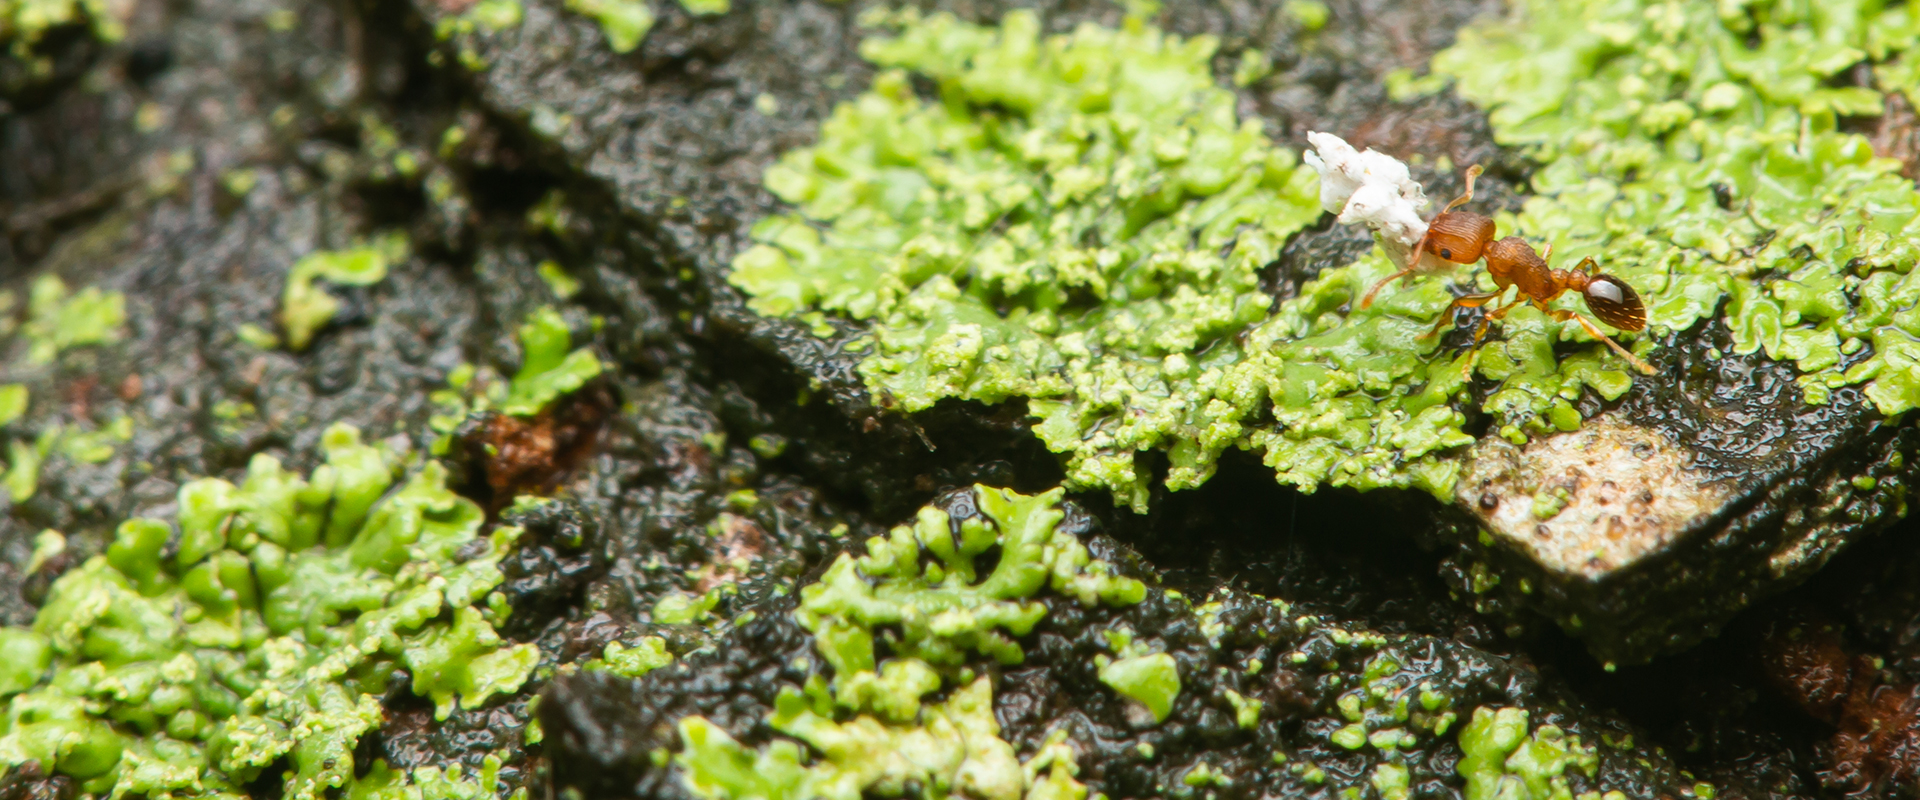 a fire ant on a moss covered rock